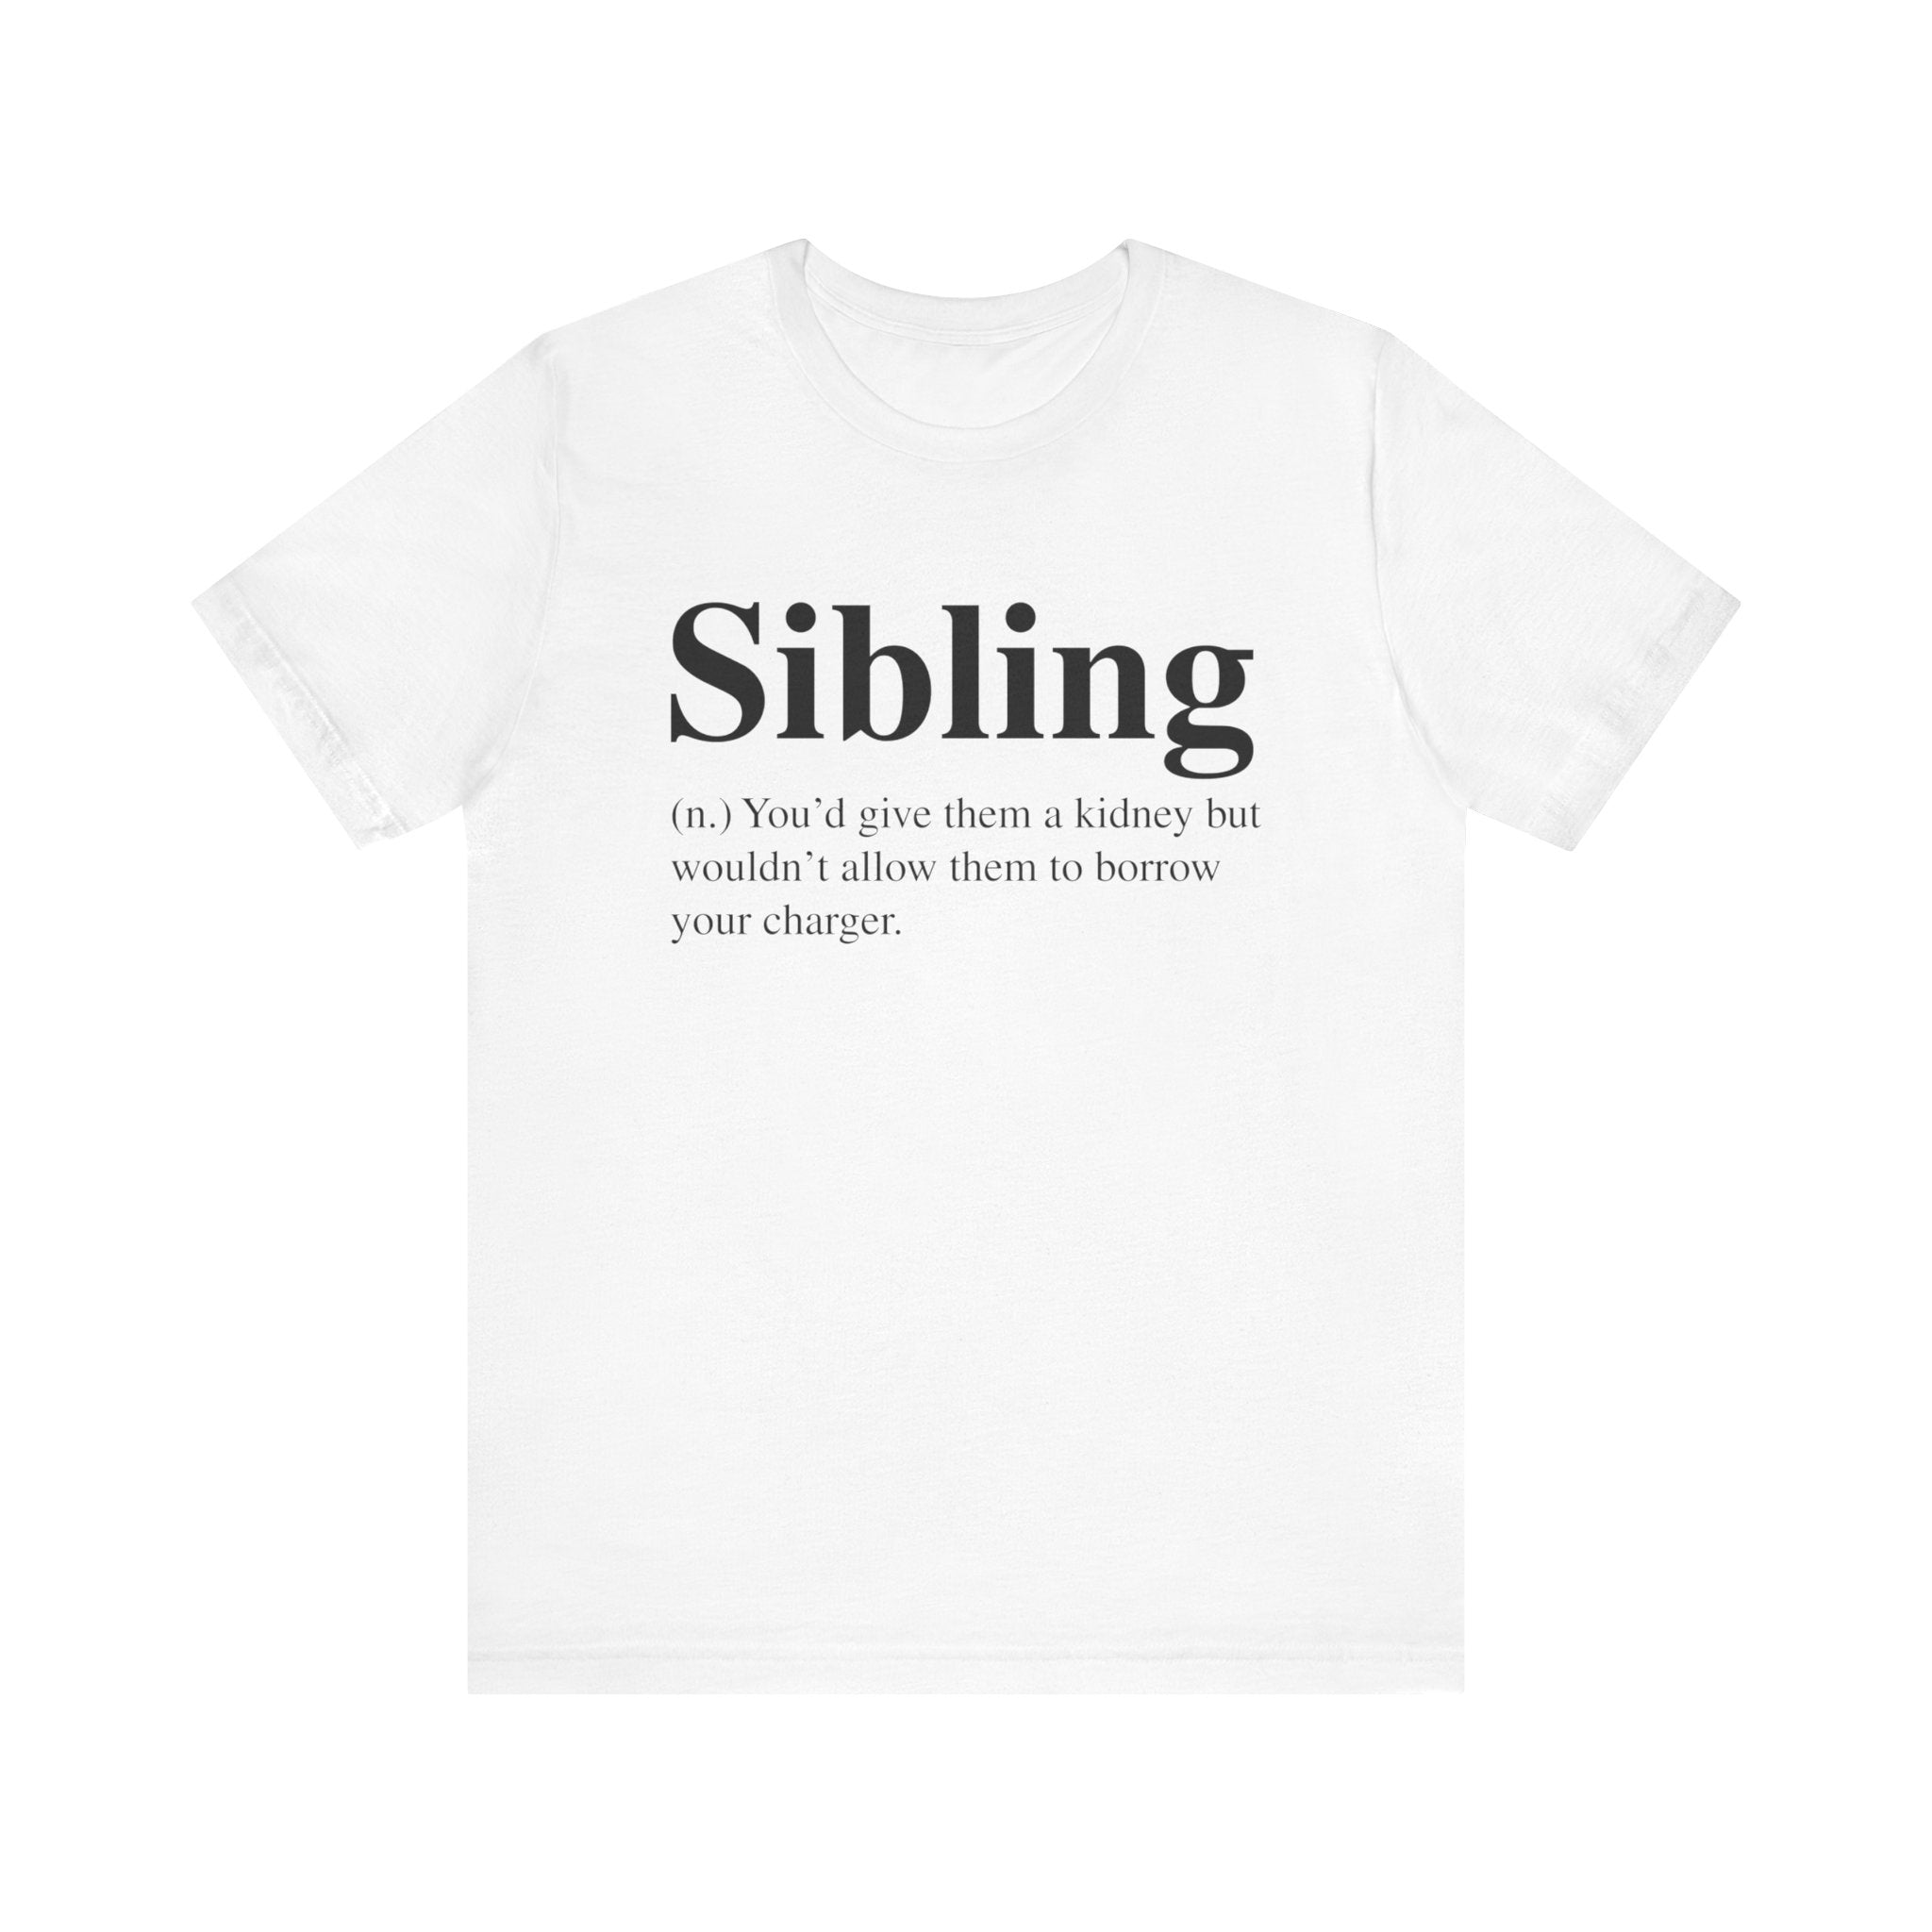 Sibling T-Shirt with the word "siblings" and a humorous definition printed on the front.